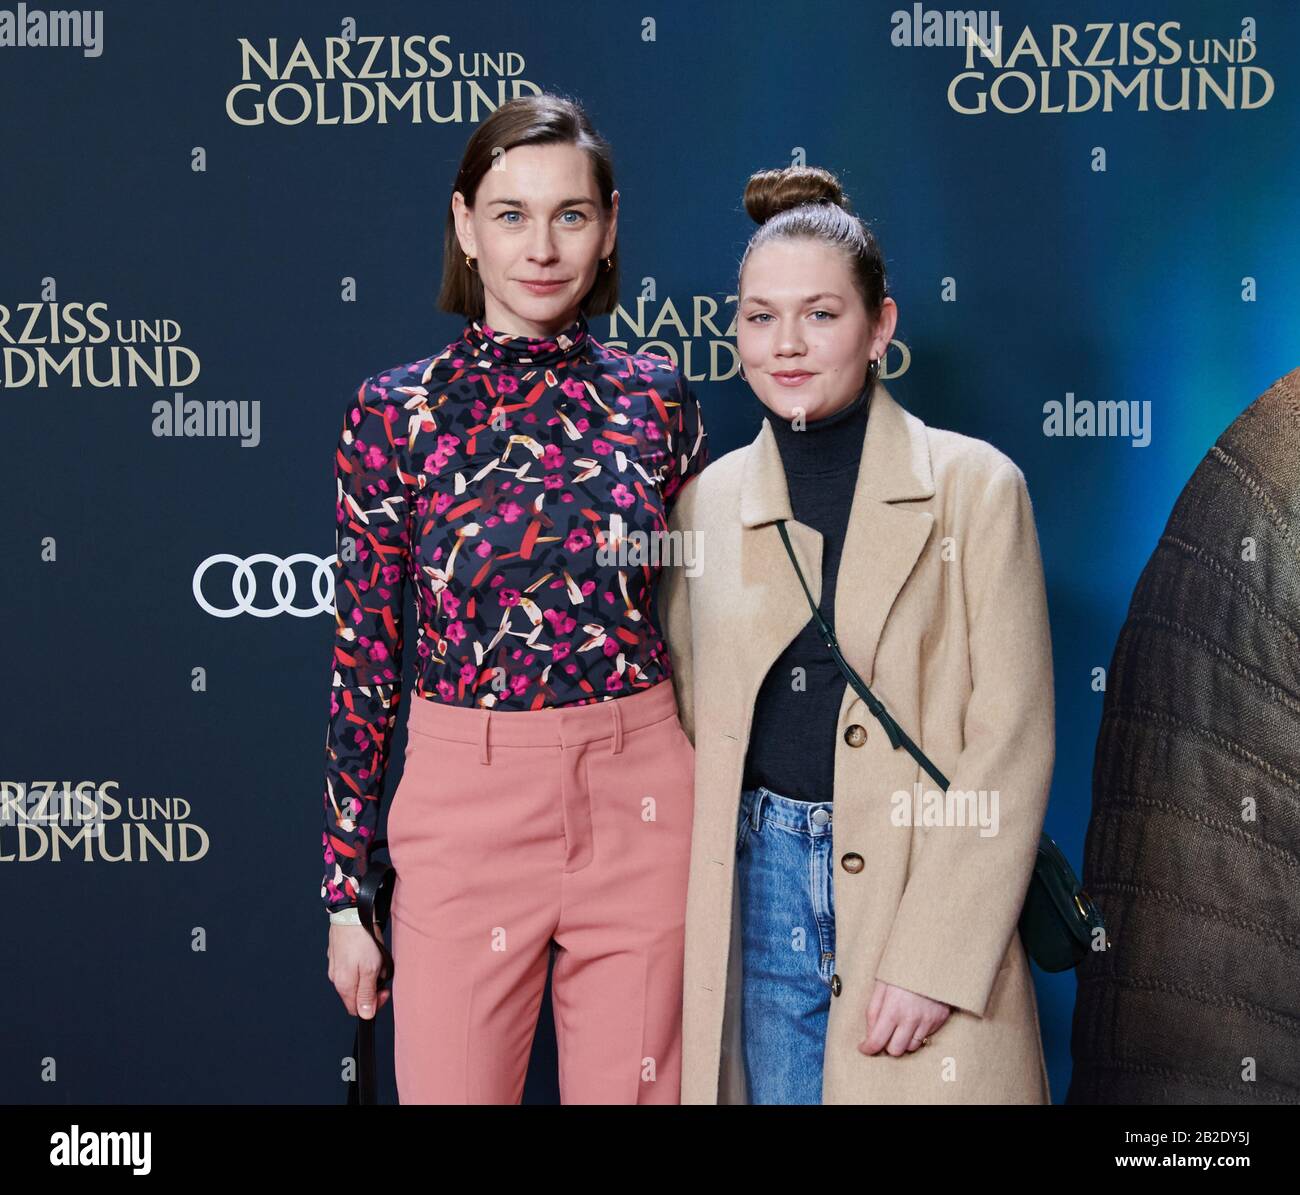 Berlin, Germany. 02nd Mar, 2020. The actress Christiane Paul (l) came with her daughter Mascha Paul to the world premiere 'Narcissus and Goldmund' at the Zoo Palast. Credit: Annette Riedl/dpa/Alamy Live News Stock Photo